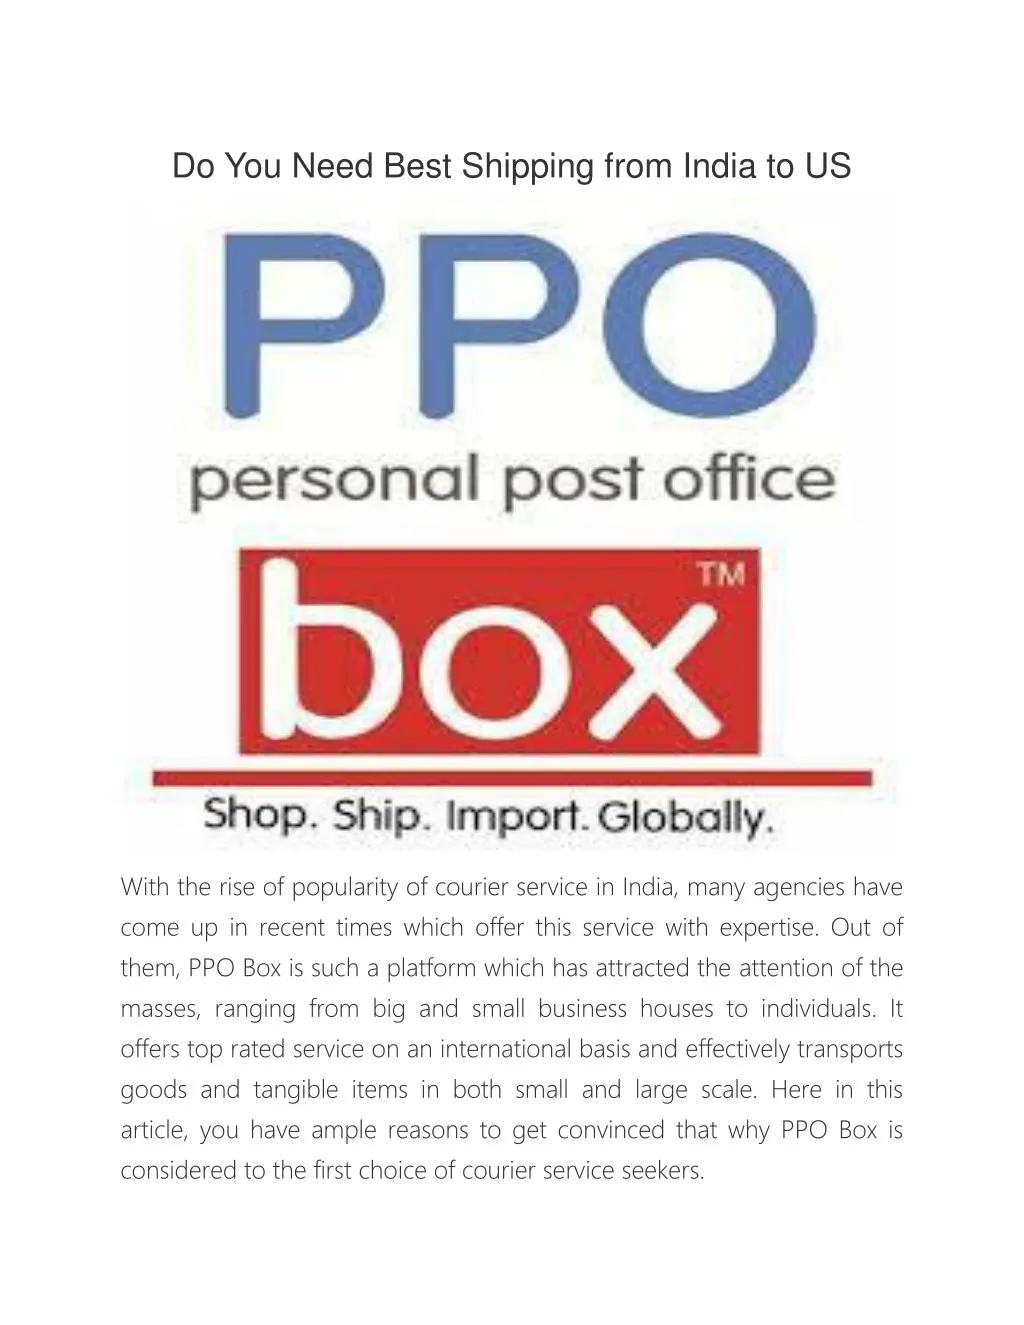 do you need best shipping from india to us